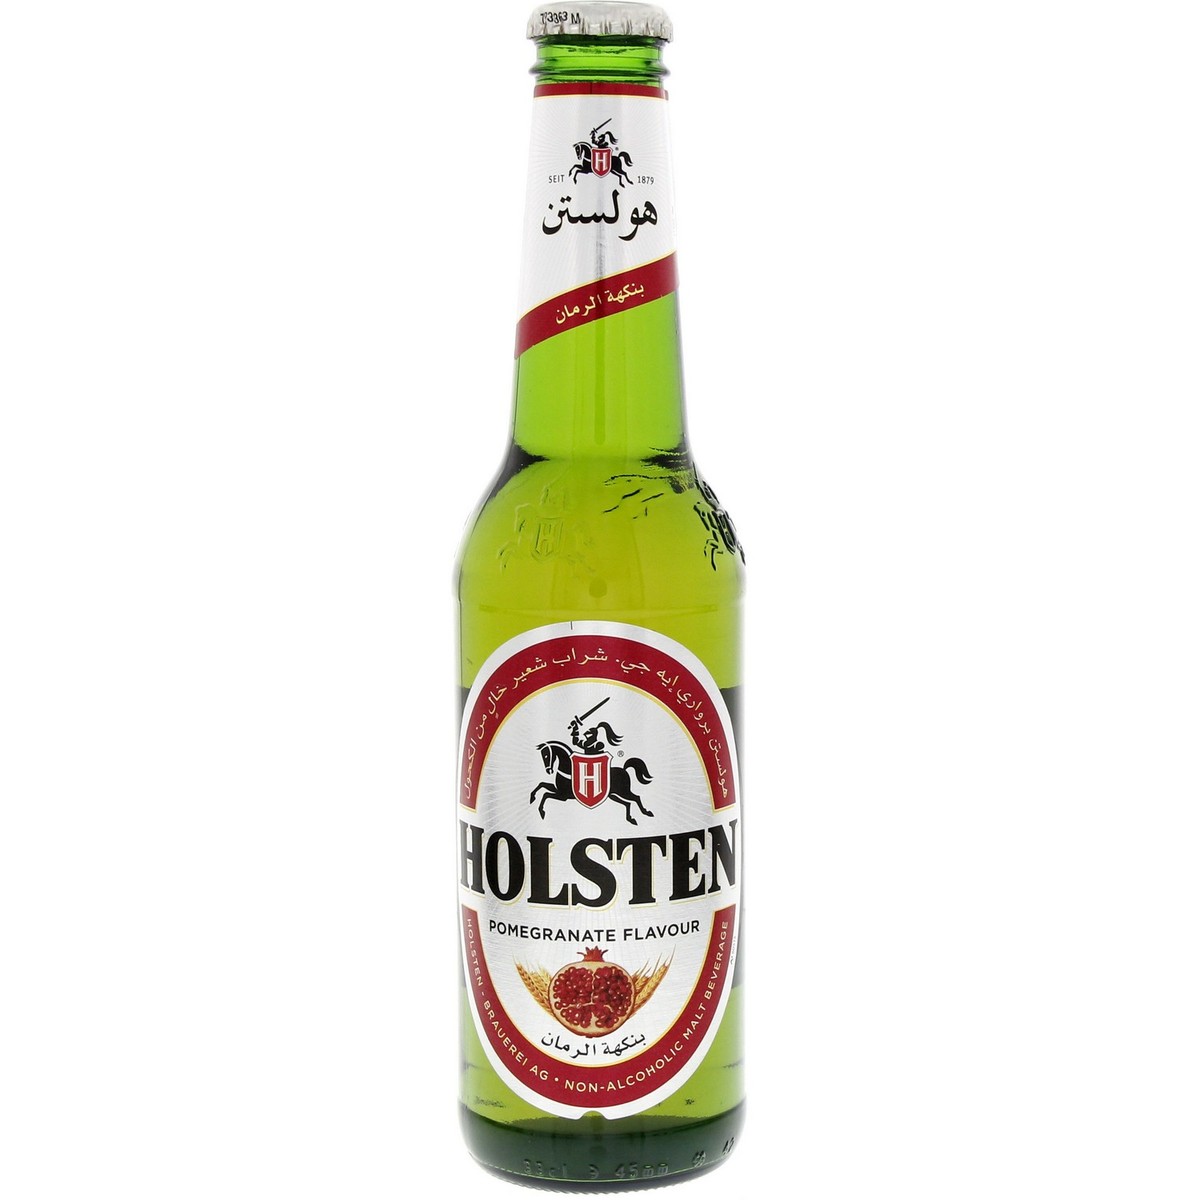 Holsten Pomegranate Flavour Non Alcoholic Beer 330 ml